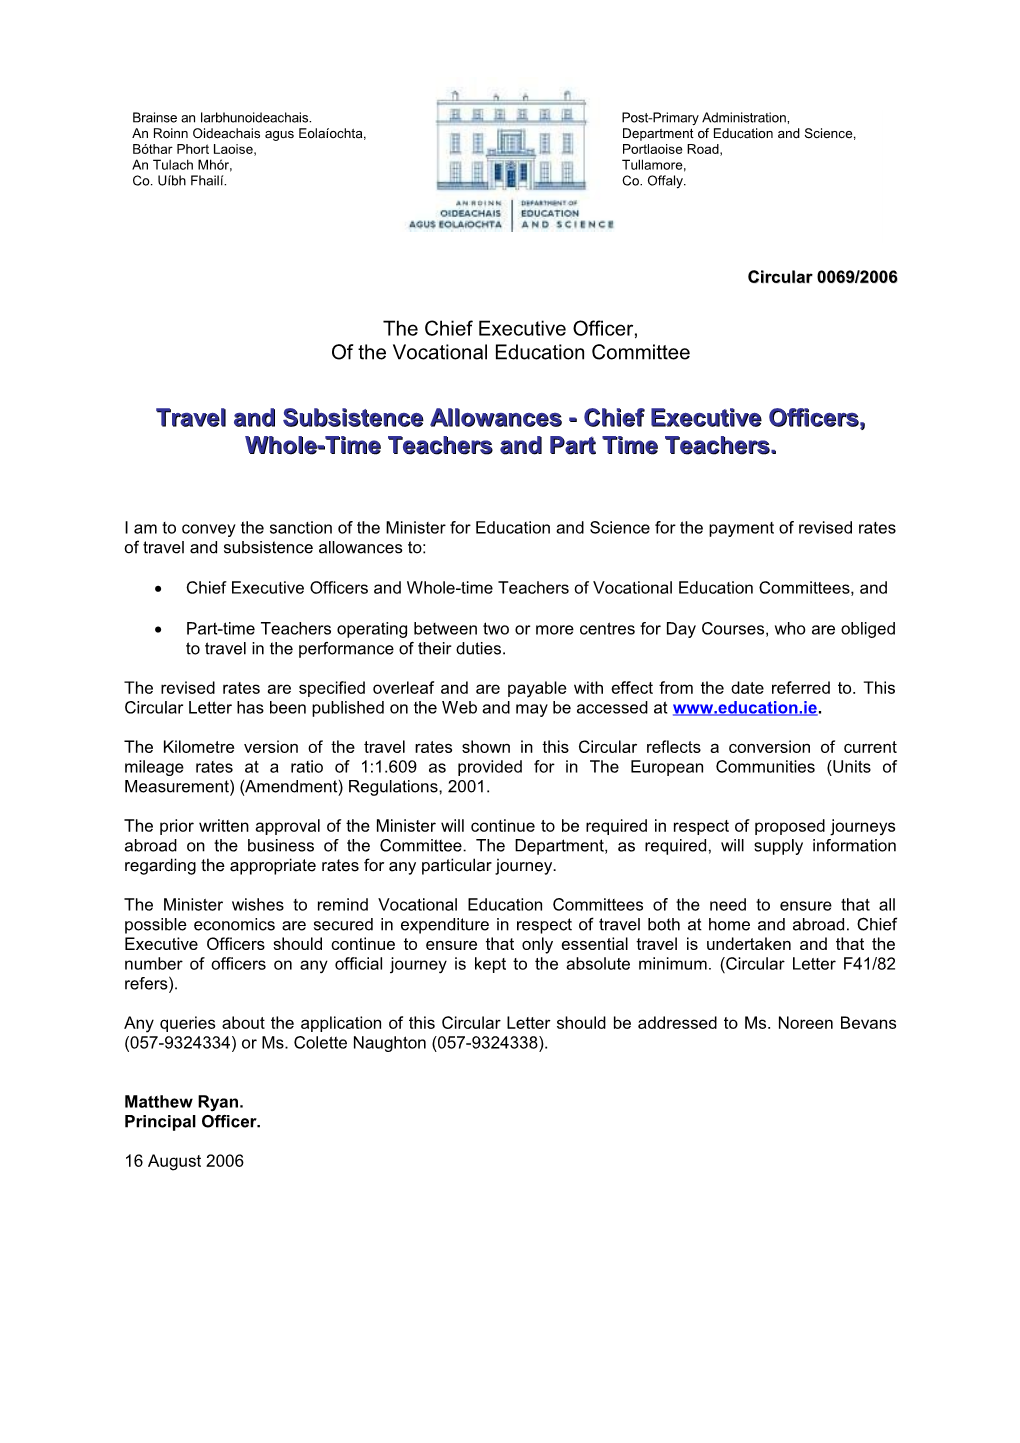 Circular 0069/2006 - Revised Rates of Travel and Subsistence Allowances to Chief Executive